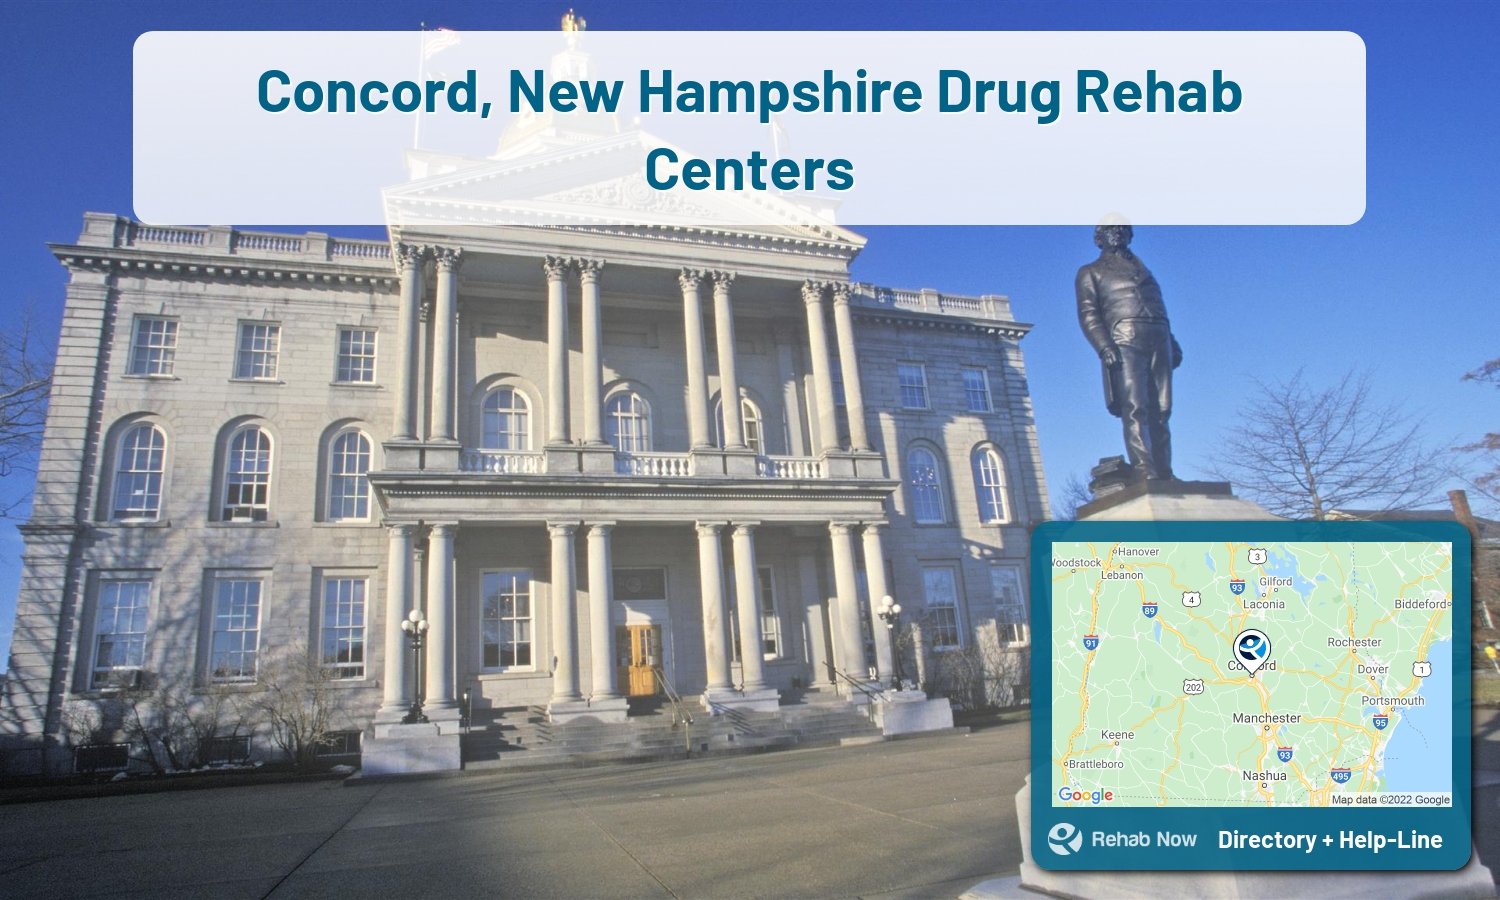 Ready to pick a rehab center in Concord? Get off alcohol, opiates, and other drugs, by selecting top drug rehab centers in New Hampshire